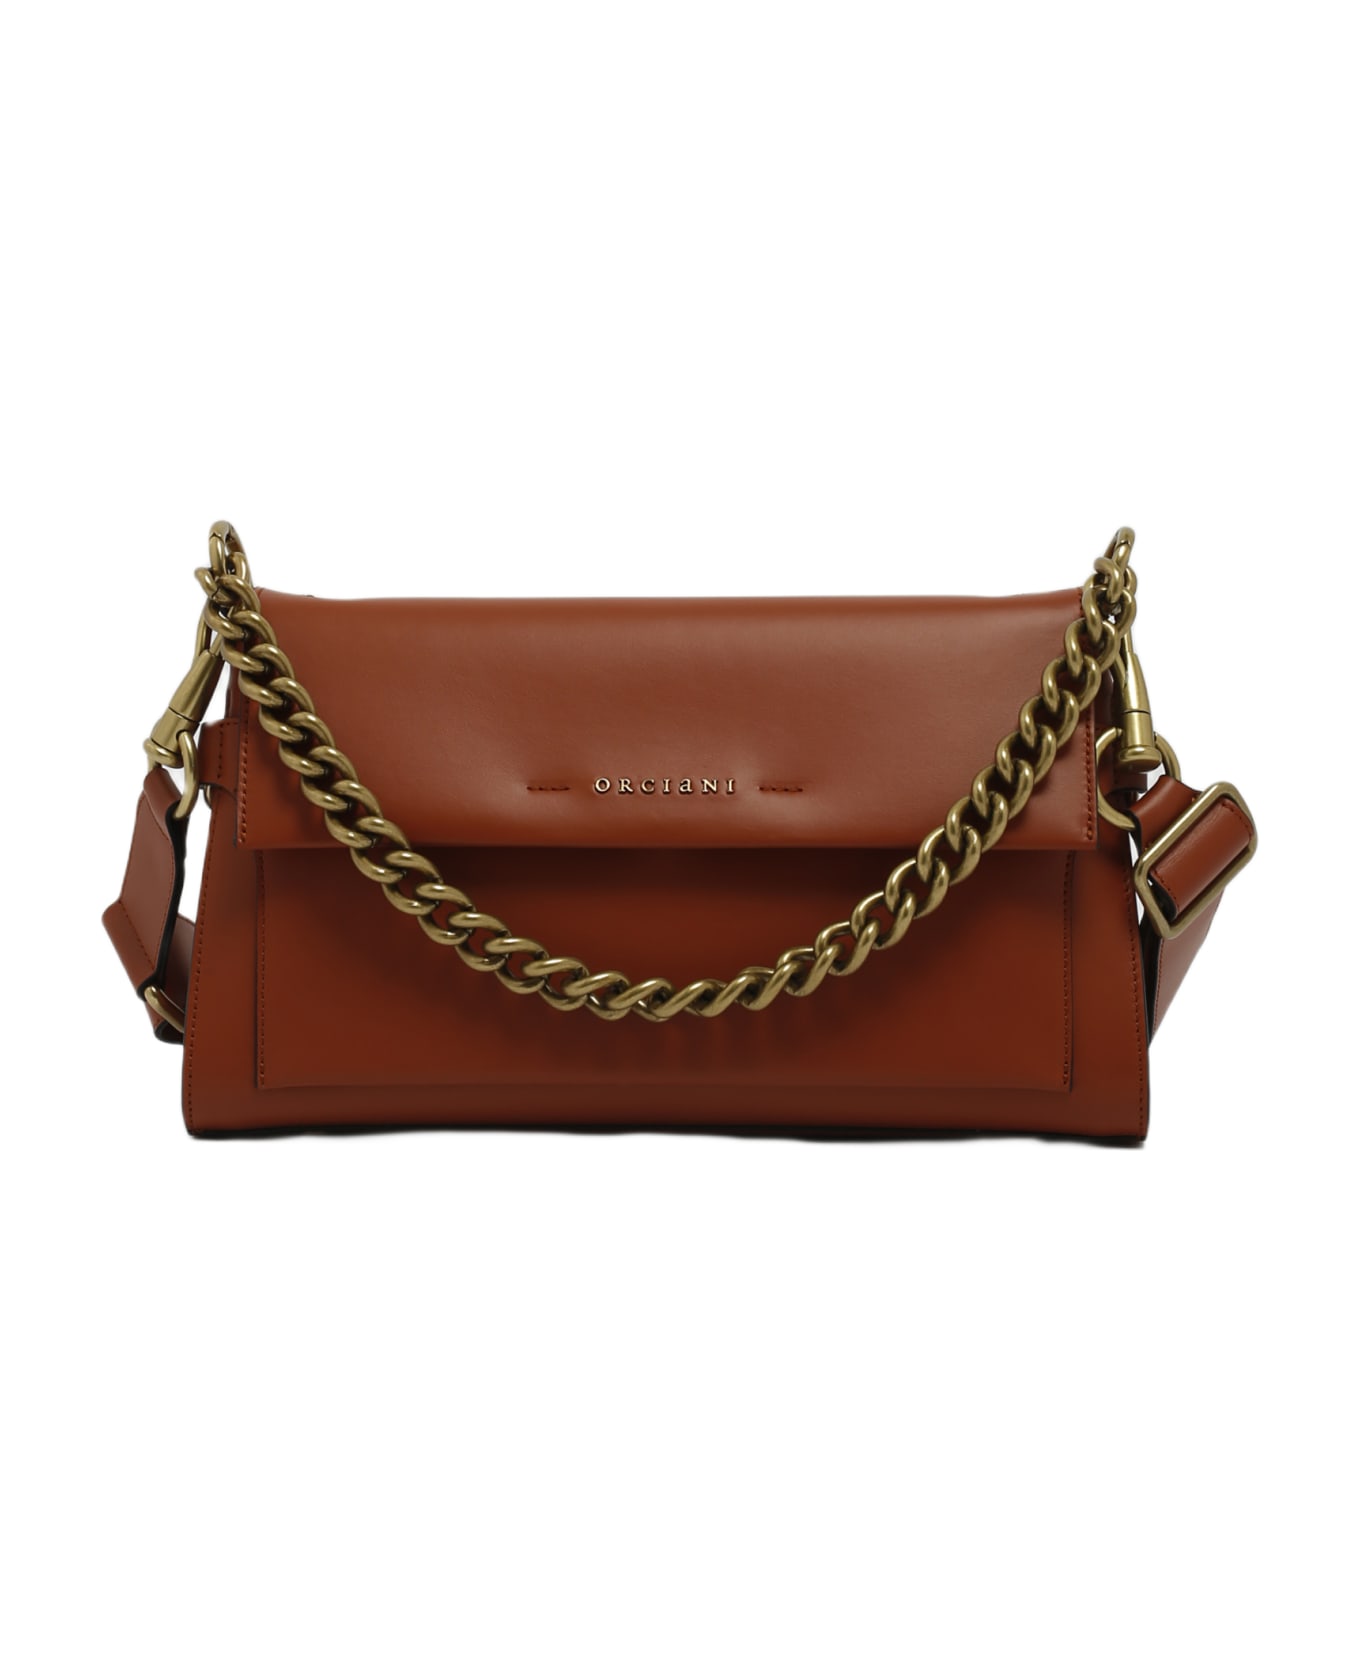 Orciani Missy Longuette Couture Shoulder Bag - CUOIO